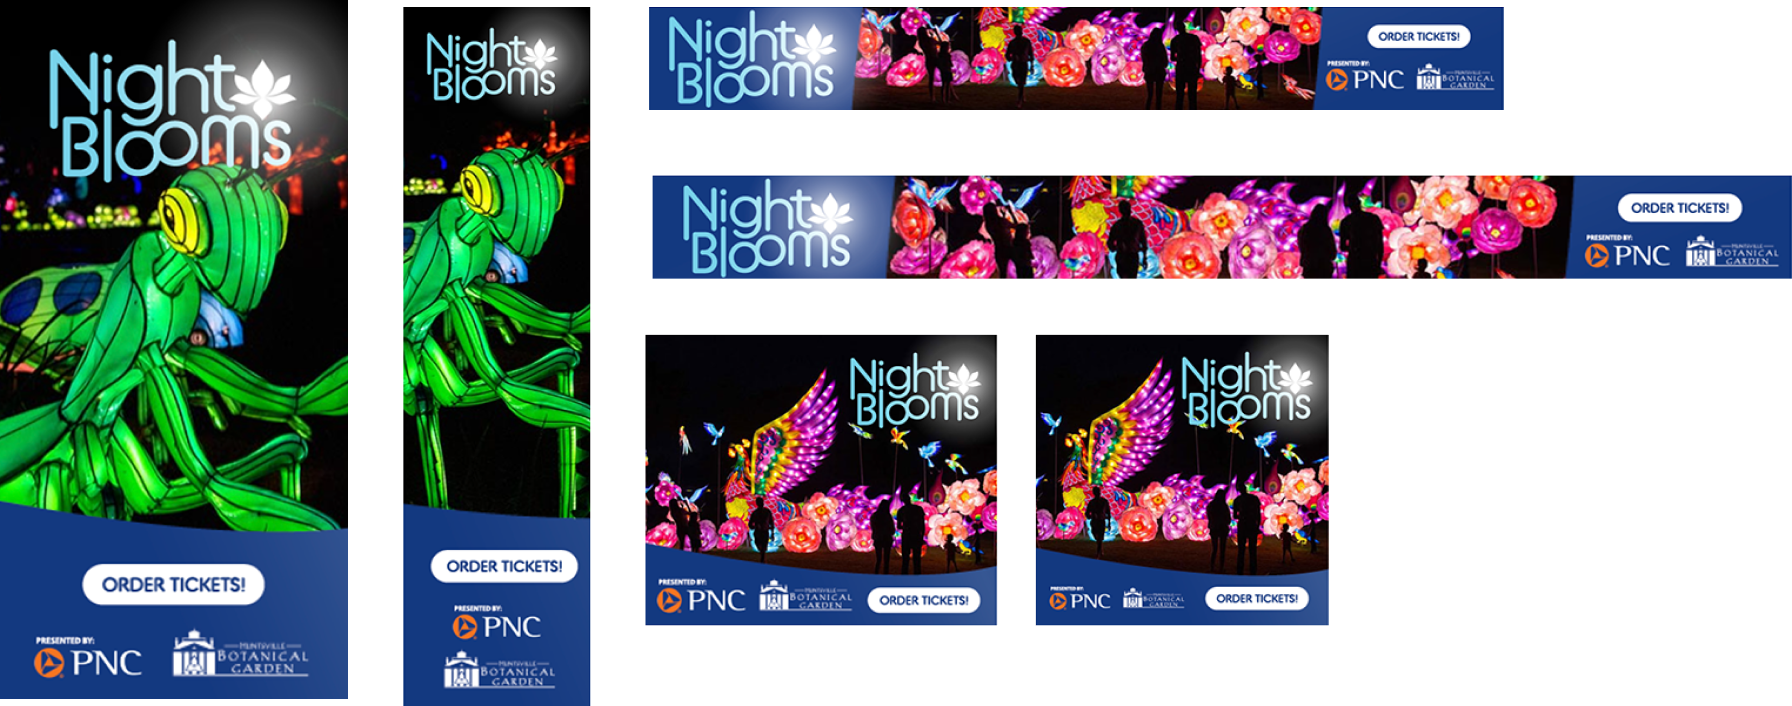 digital ads for Night Blooms, a limited time event at Huntsville Botanical Garden, designed and placed by Red Sage